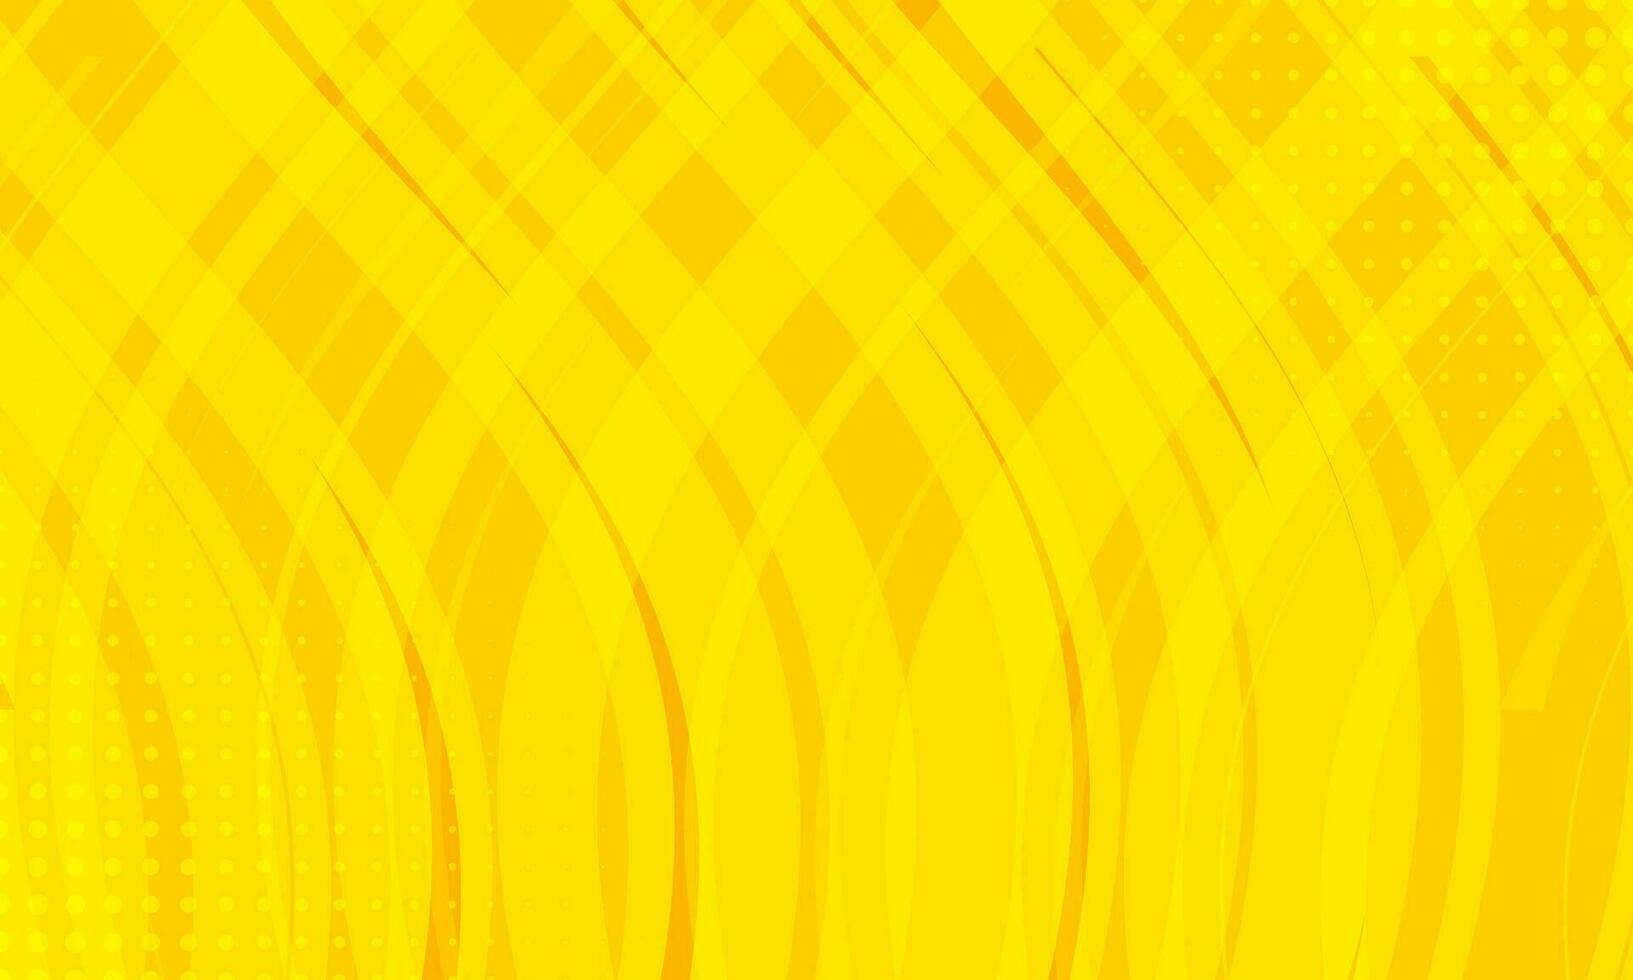 Modern Abstract Striped Yellow Background vector